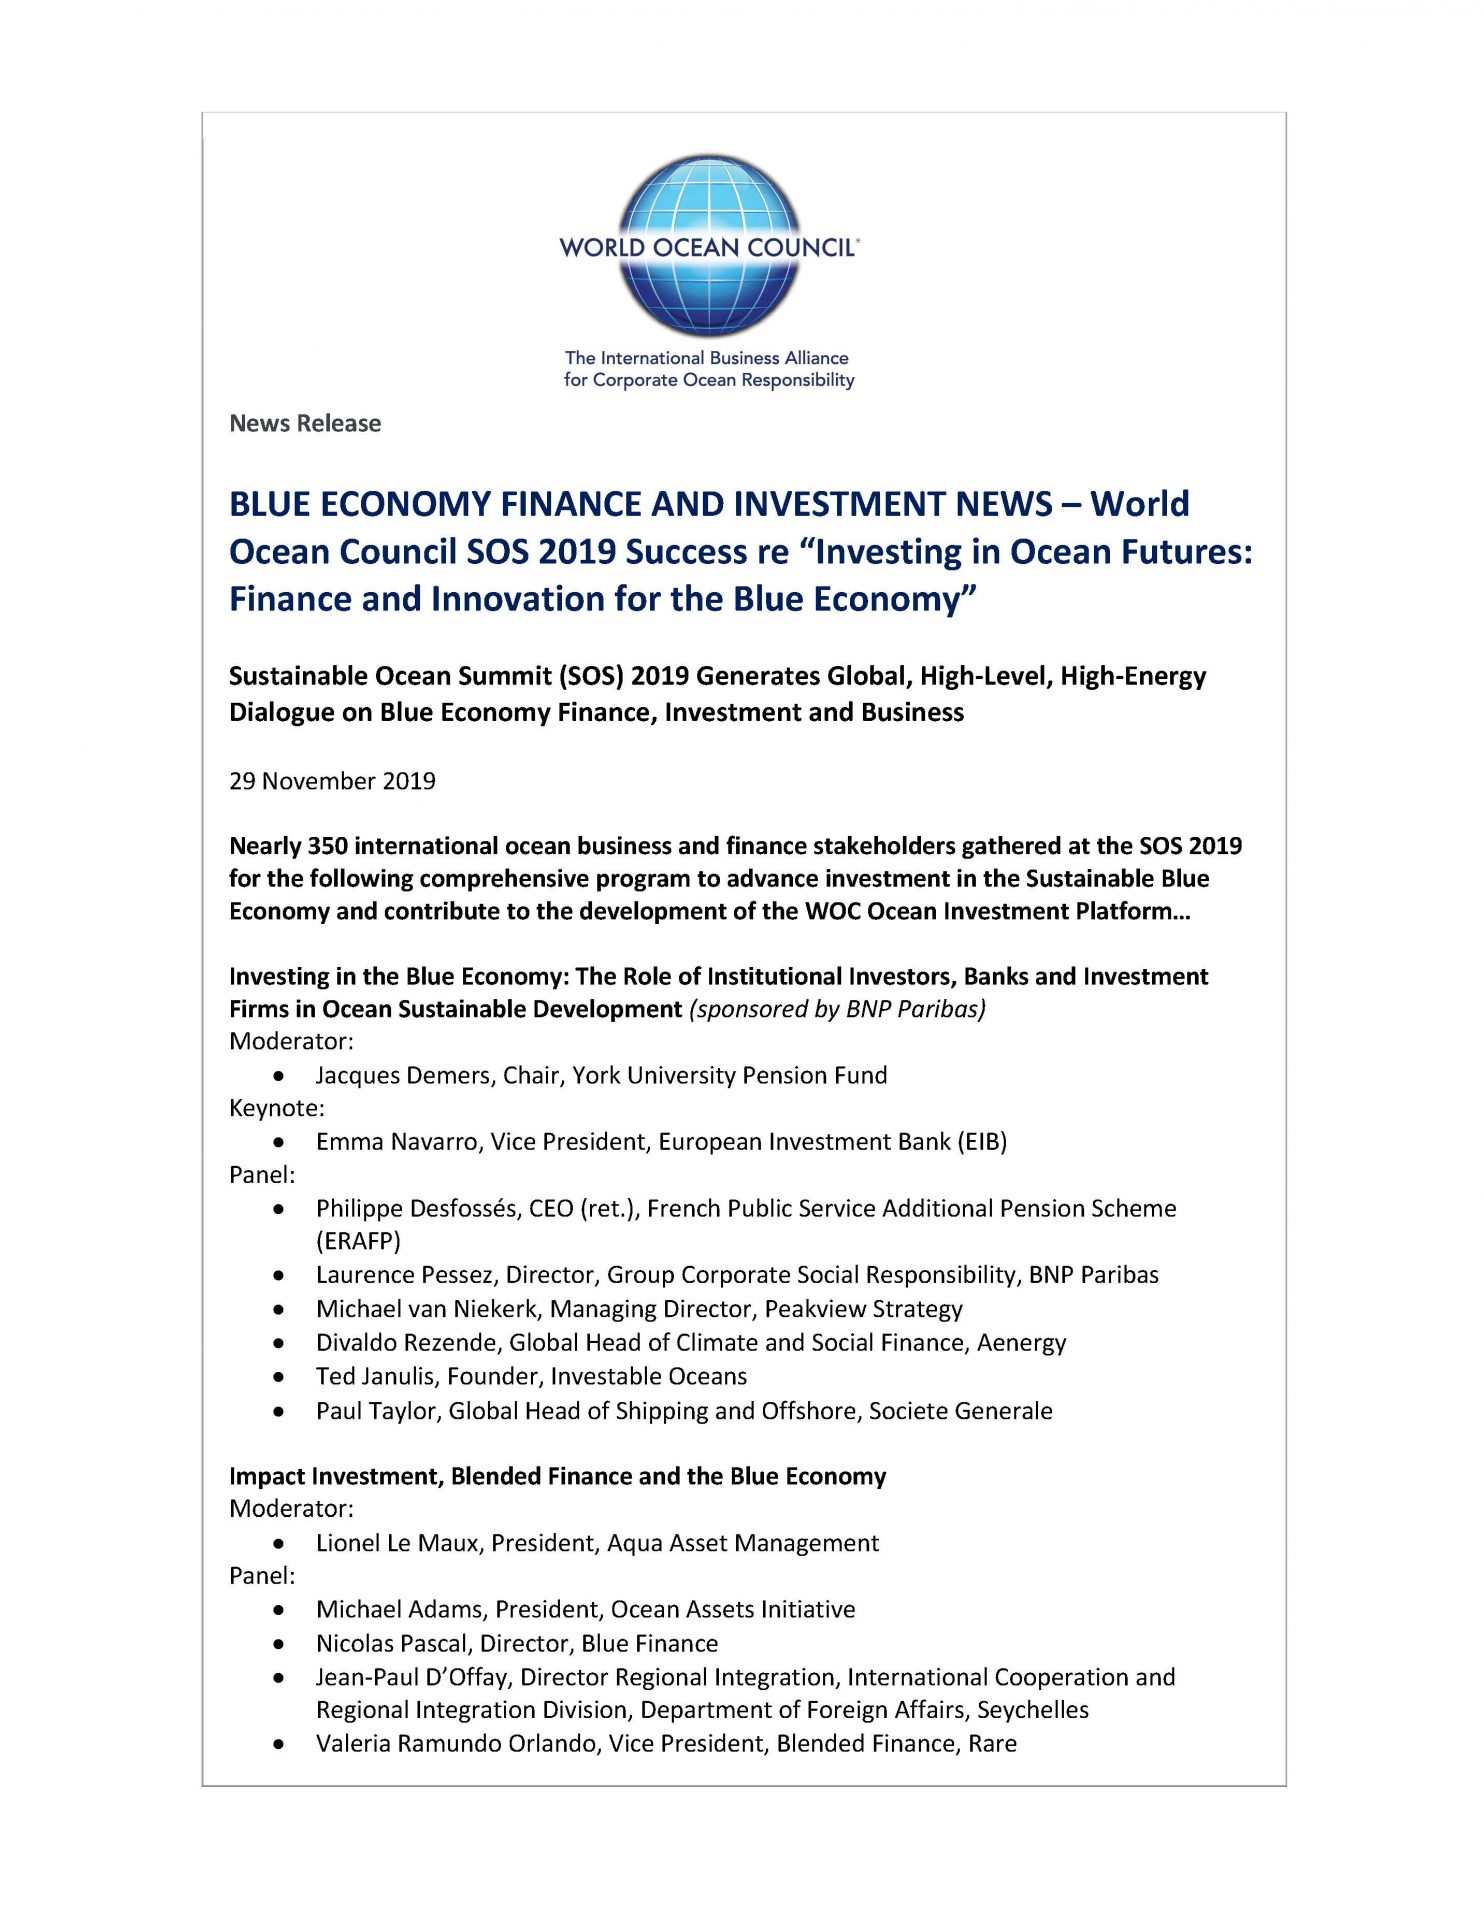 Blue Economy Finance and Investment News - Investing in Ocean Futures - SOS 2019 Success - 29 November 2019